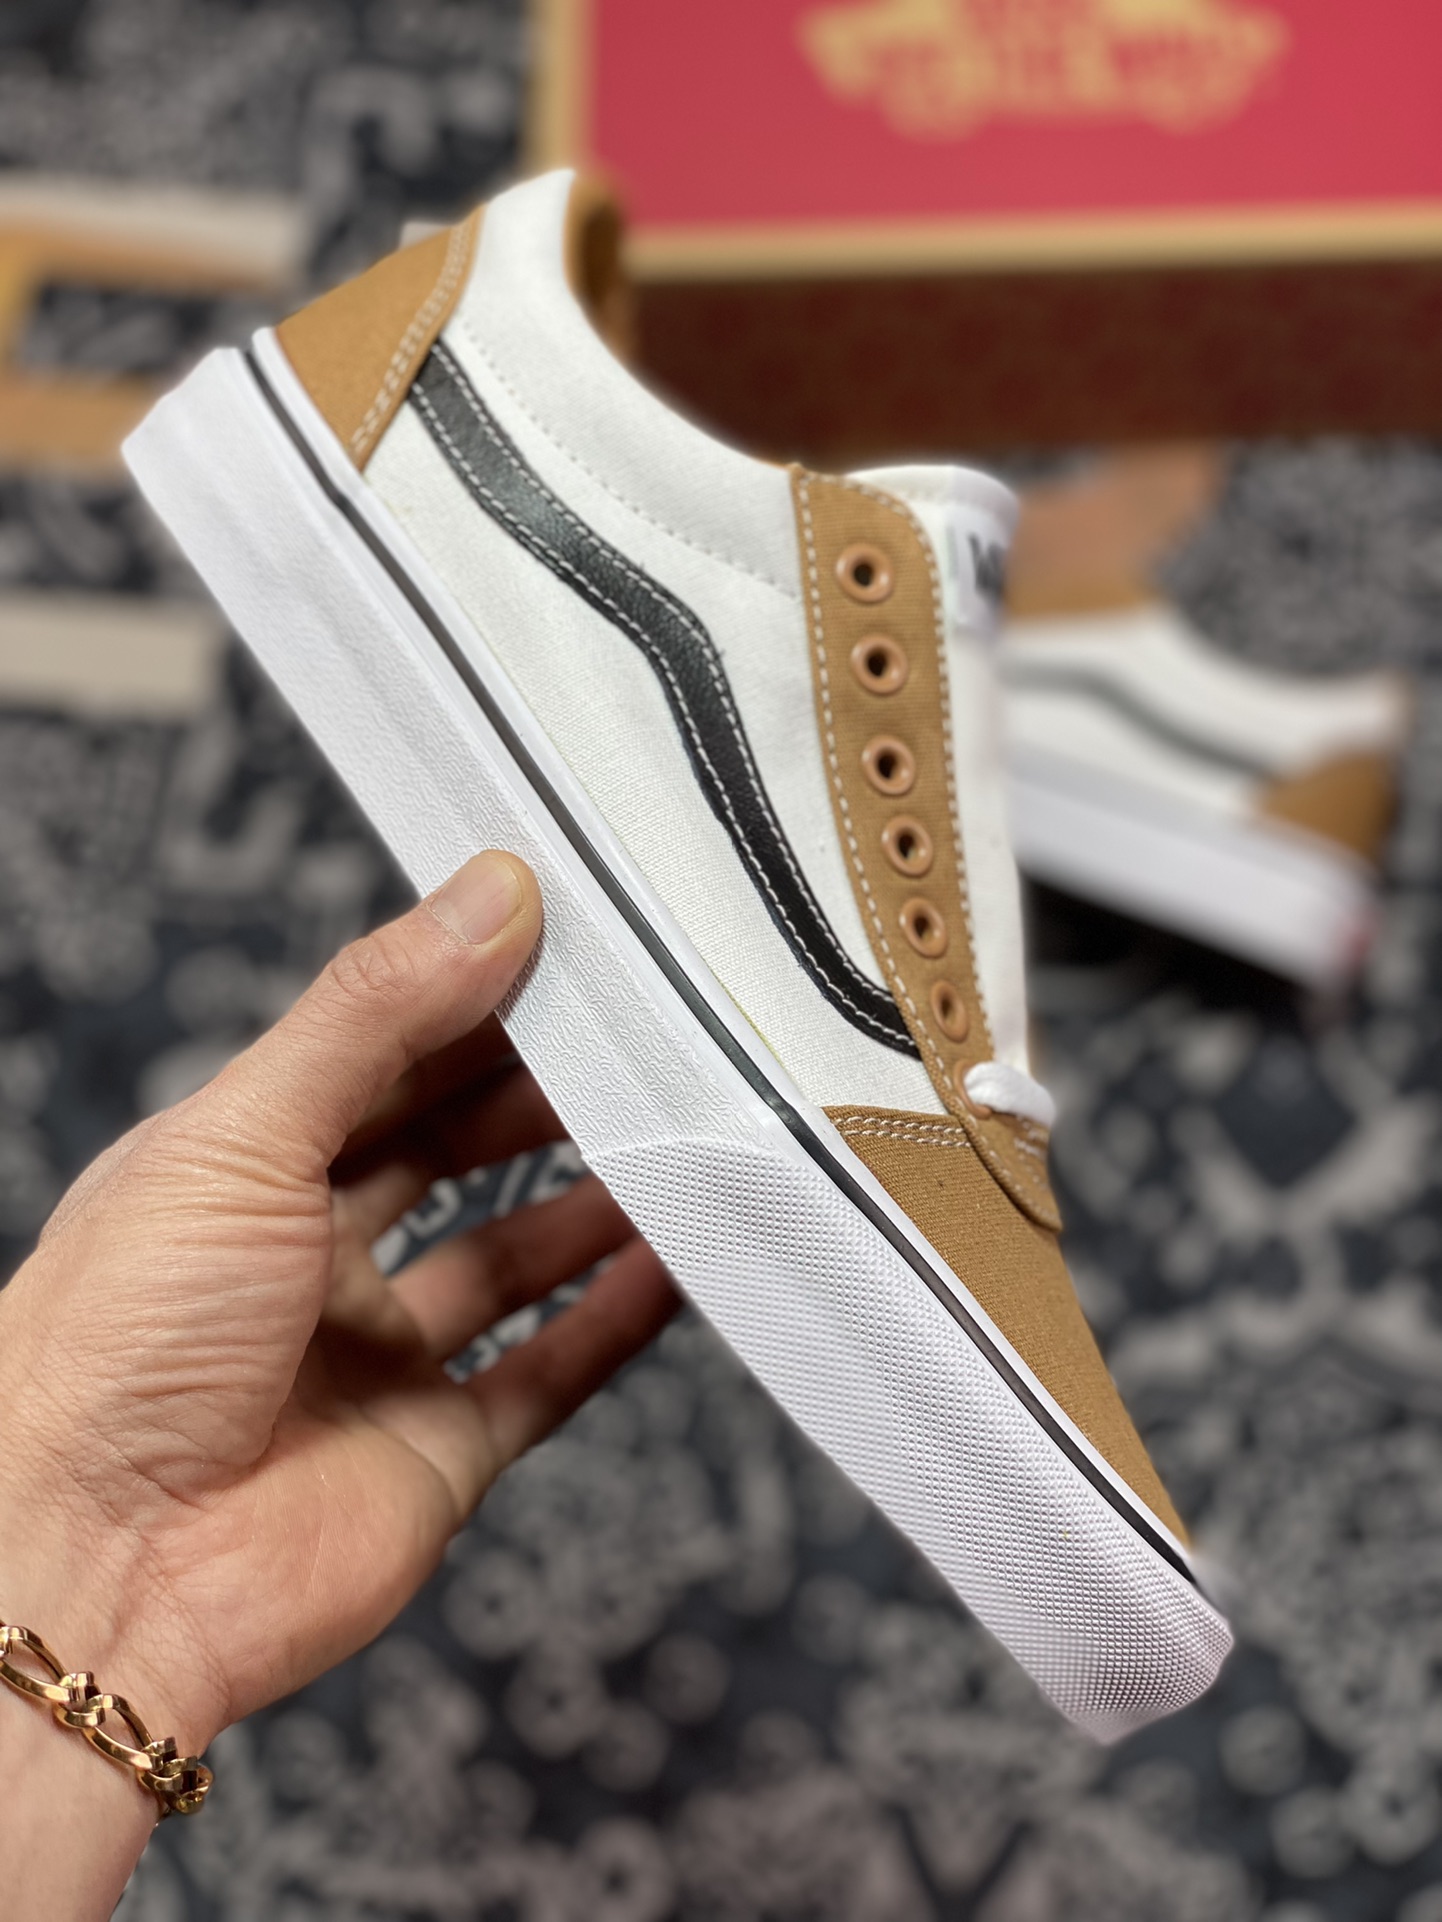 Vans Ward retro coffee brown color matching official synchronized Vans sports and leisure series